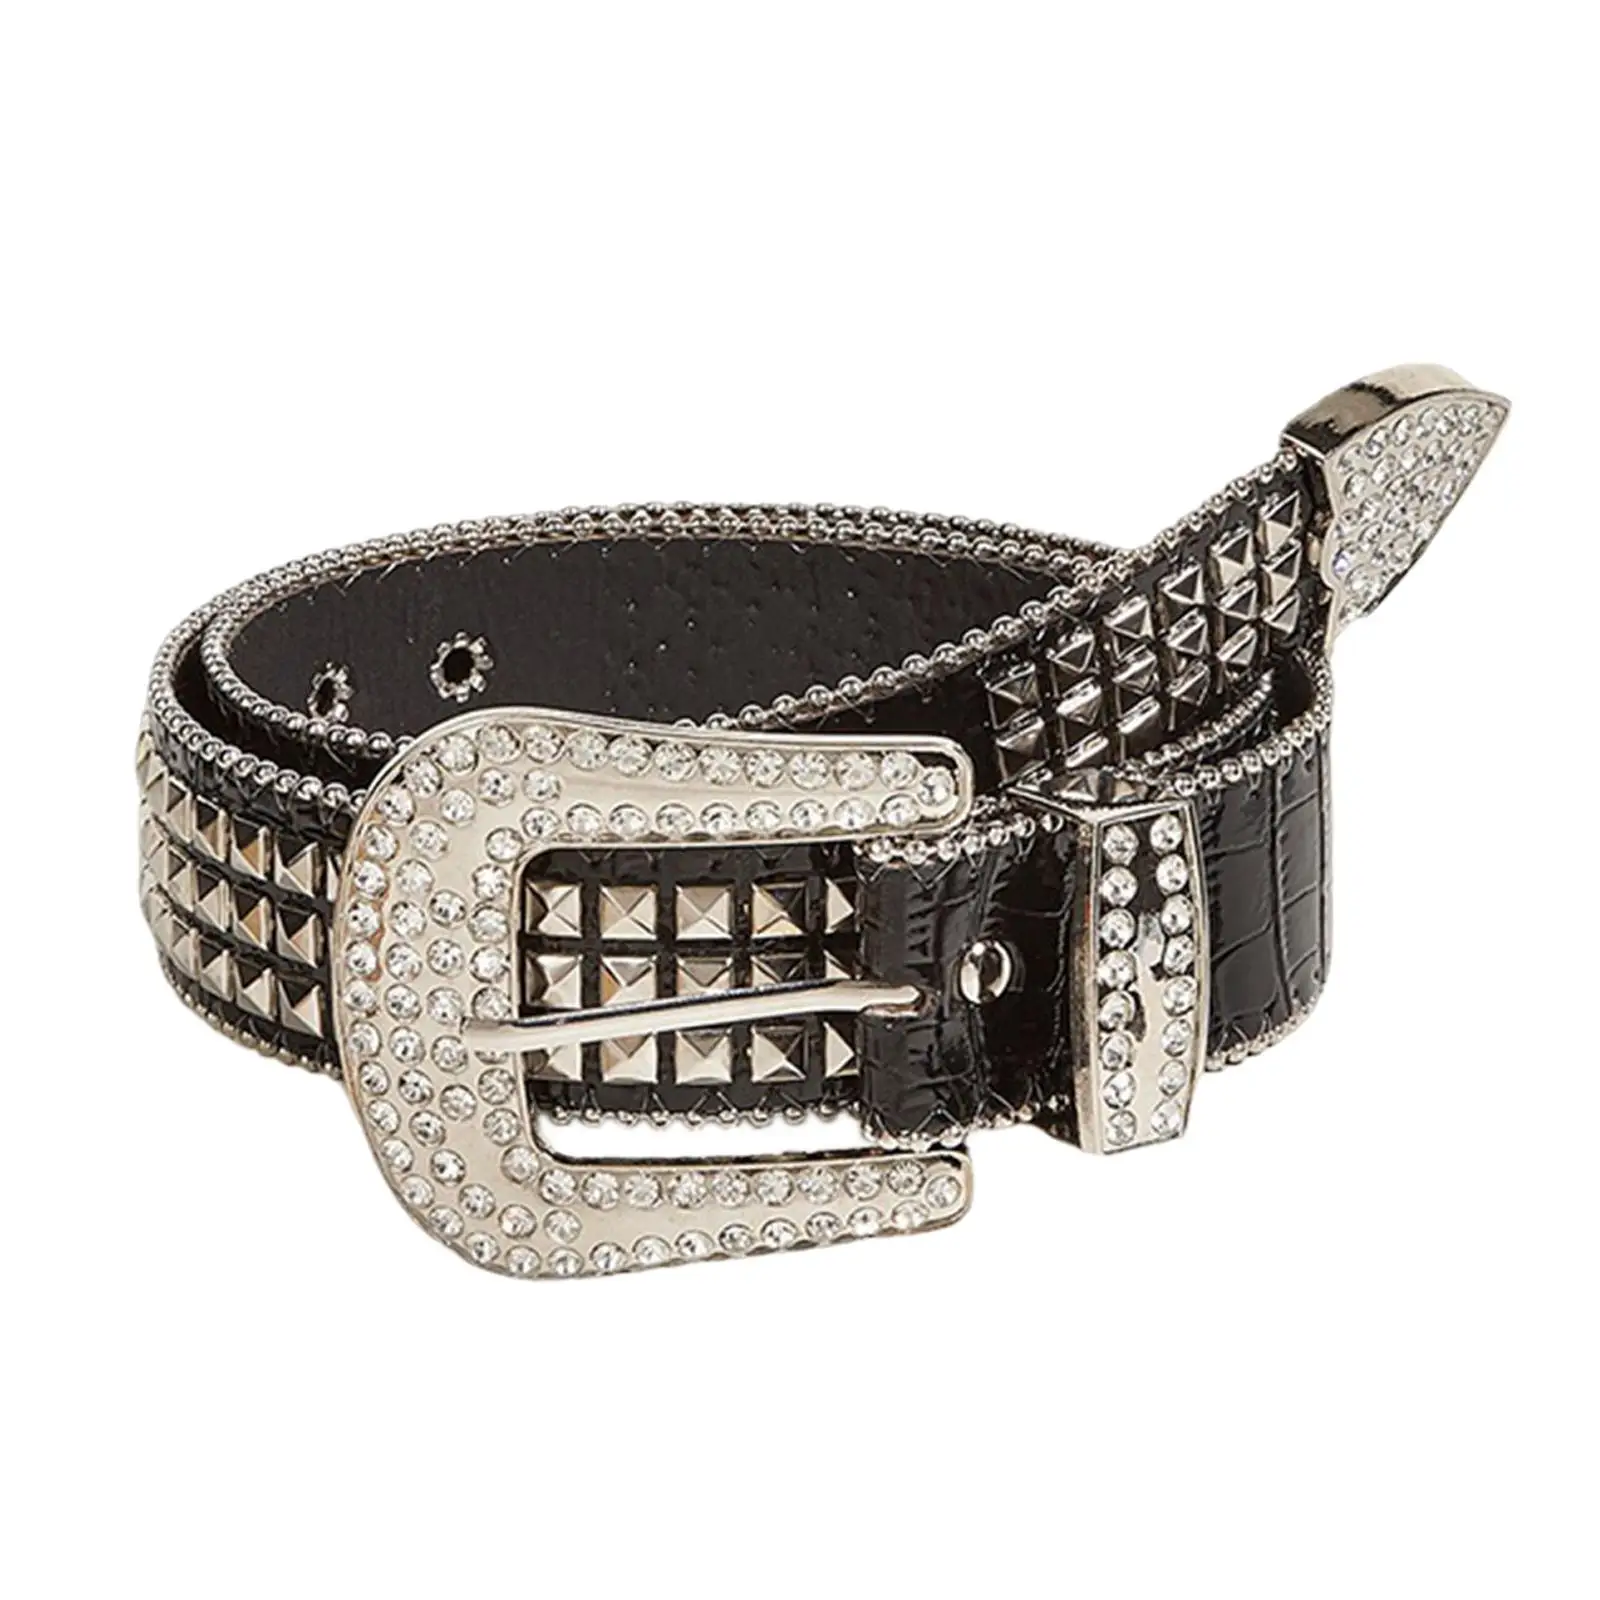 Ladies Women Rhinestone Belt Western Bling Wide PU Leather Studded for Motorcycle